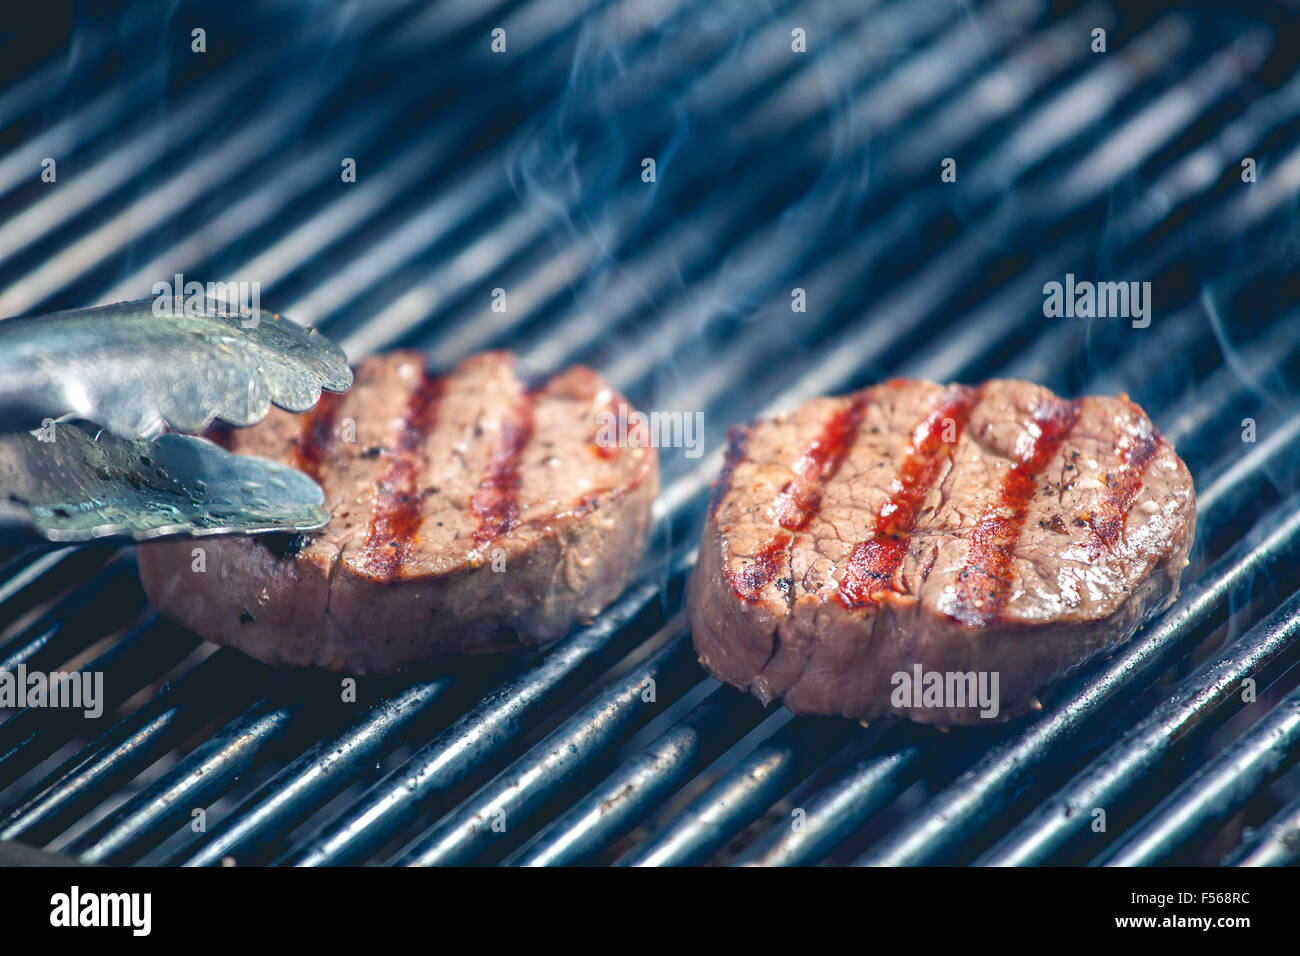 Delicious steak on grill Stock Photo